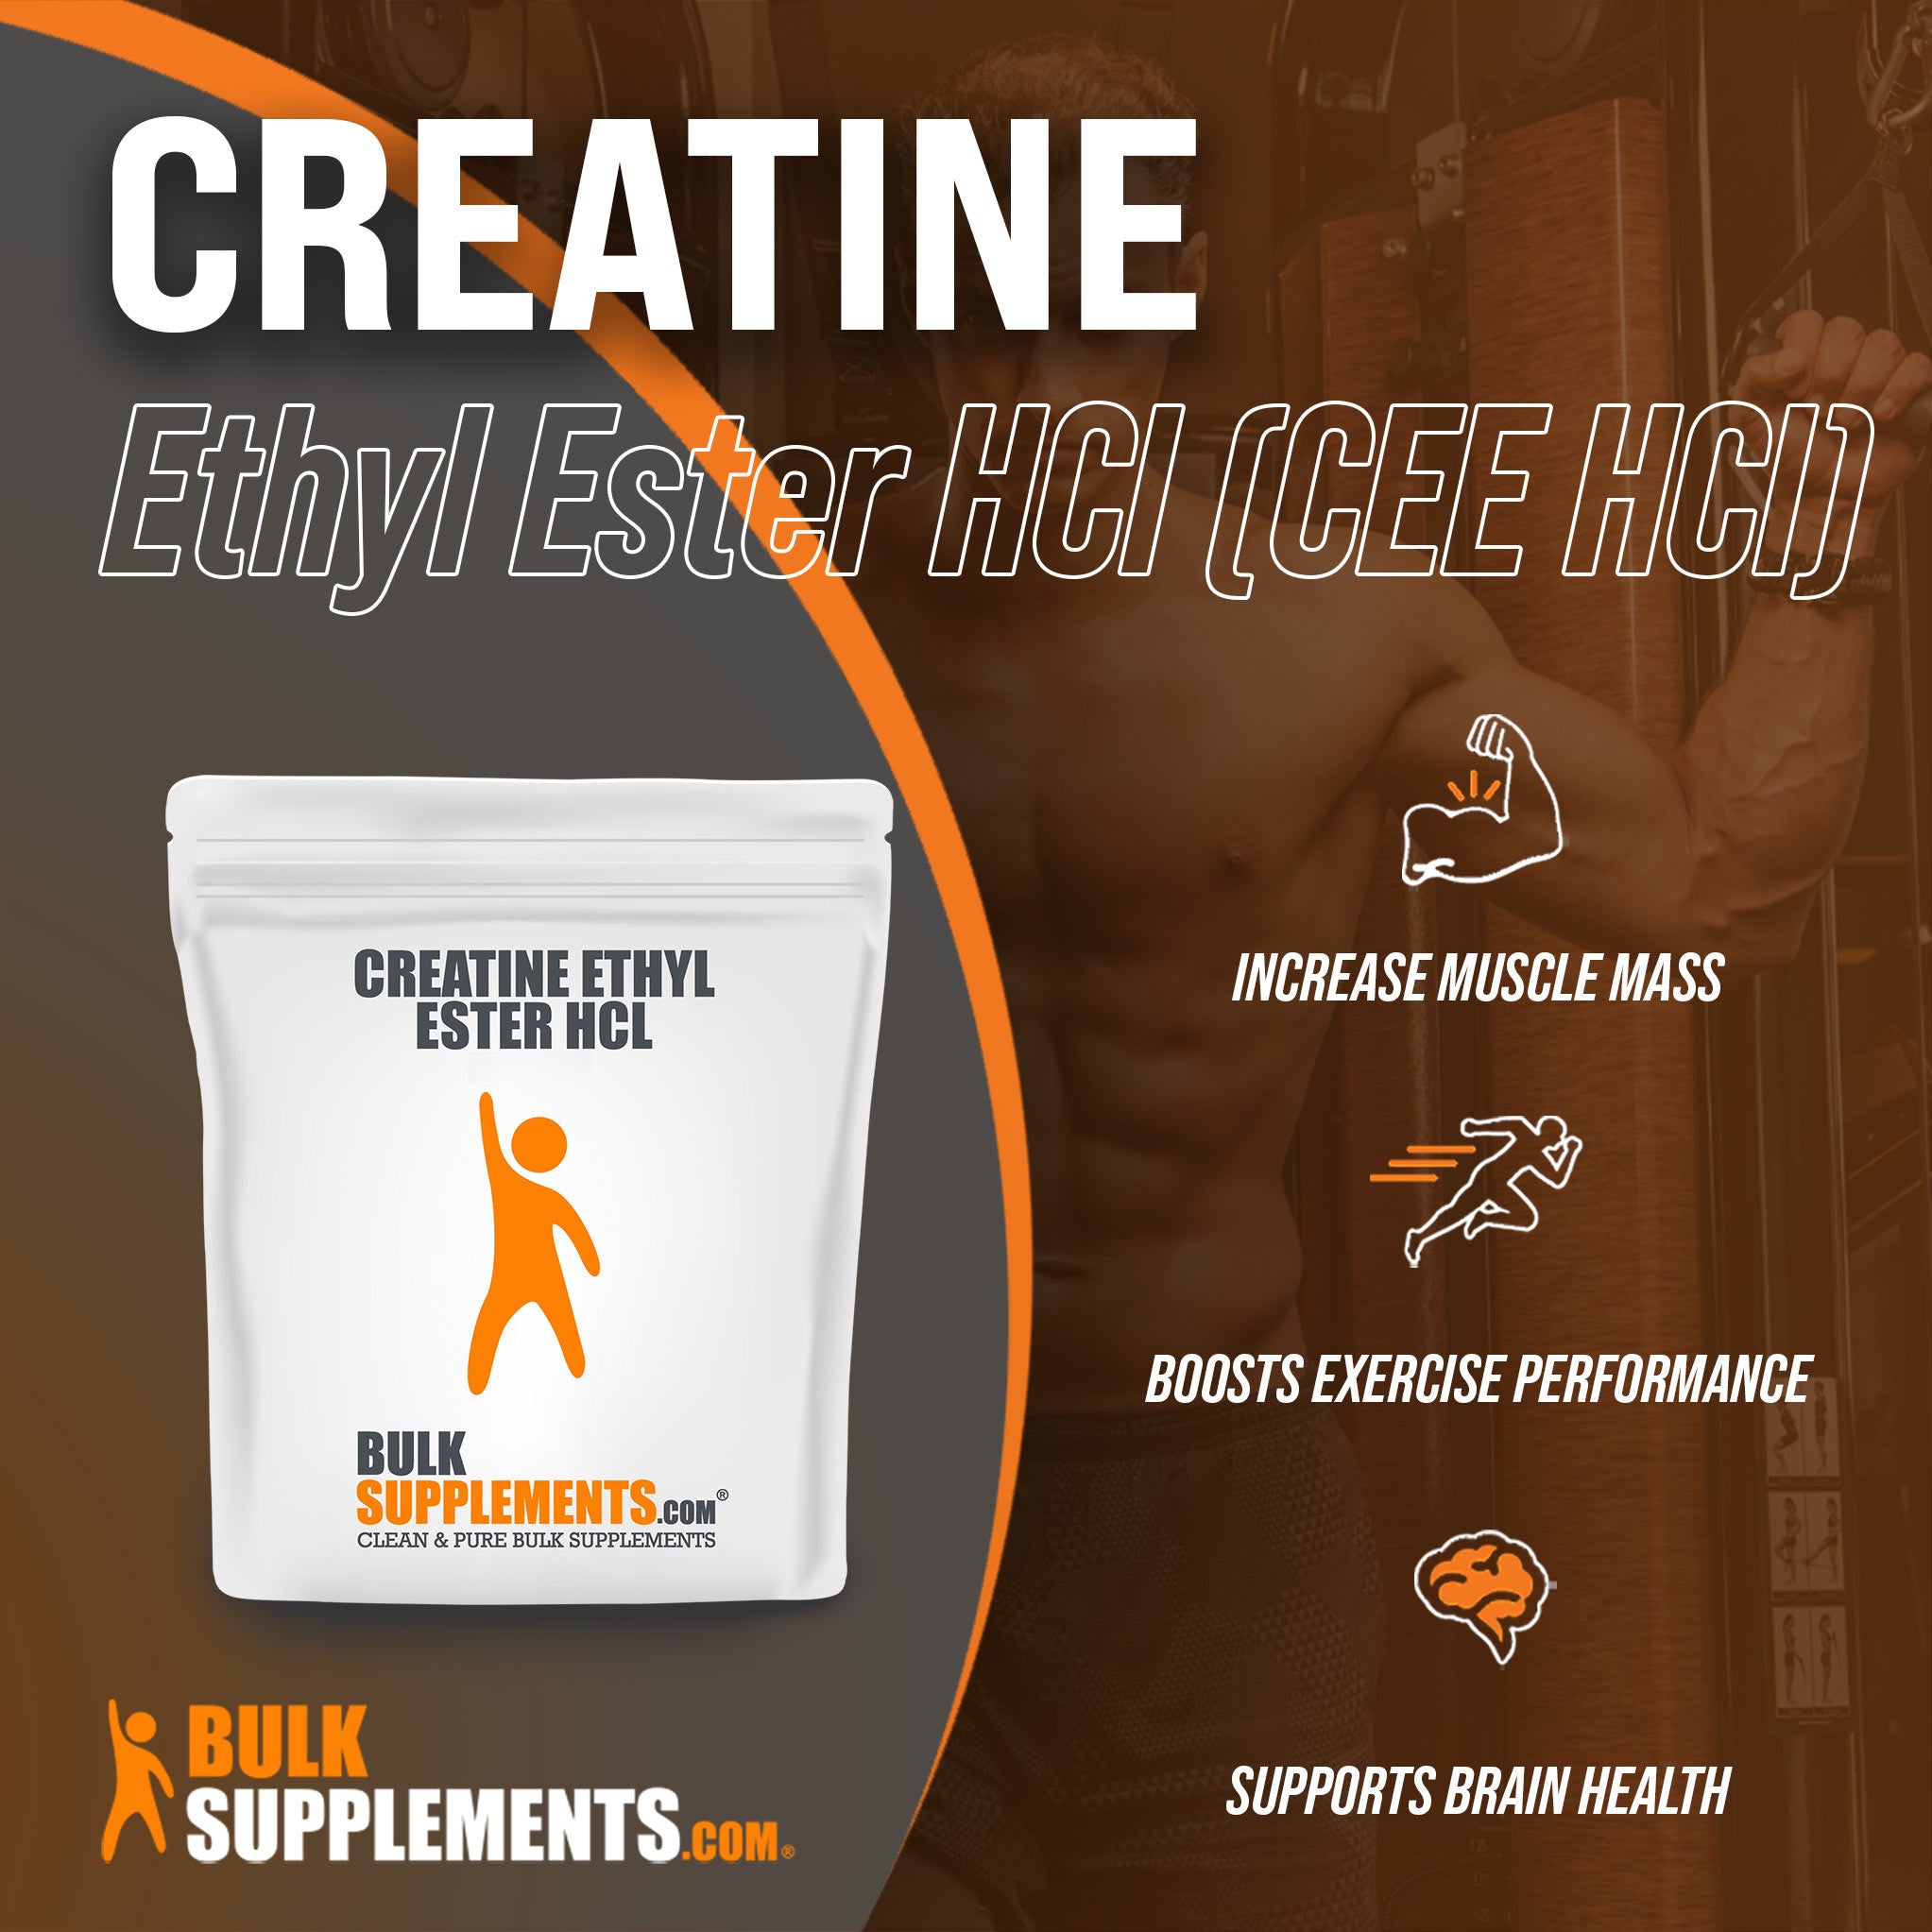 Benefits of Creatine Ethyl Ester HCl (CEE HCl); increase muscle mass, boosts exercise performance, supports brain health